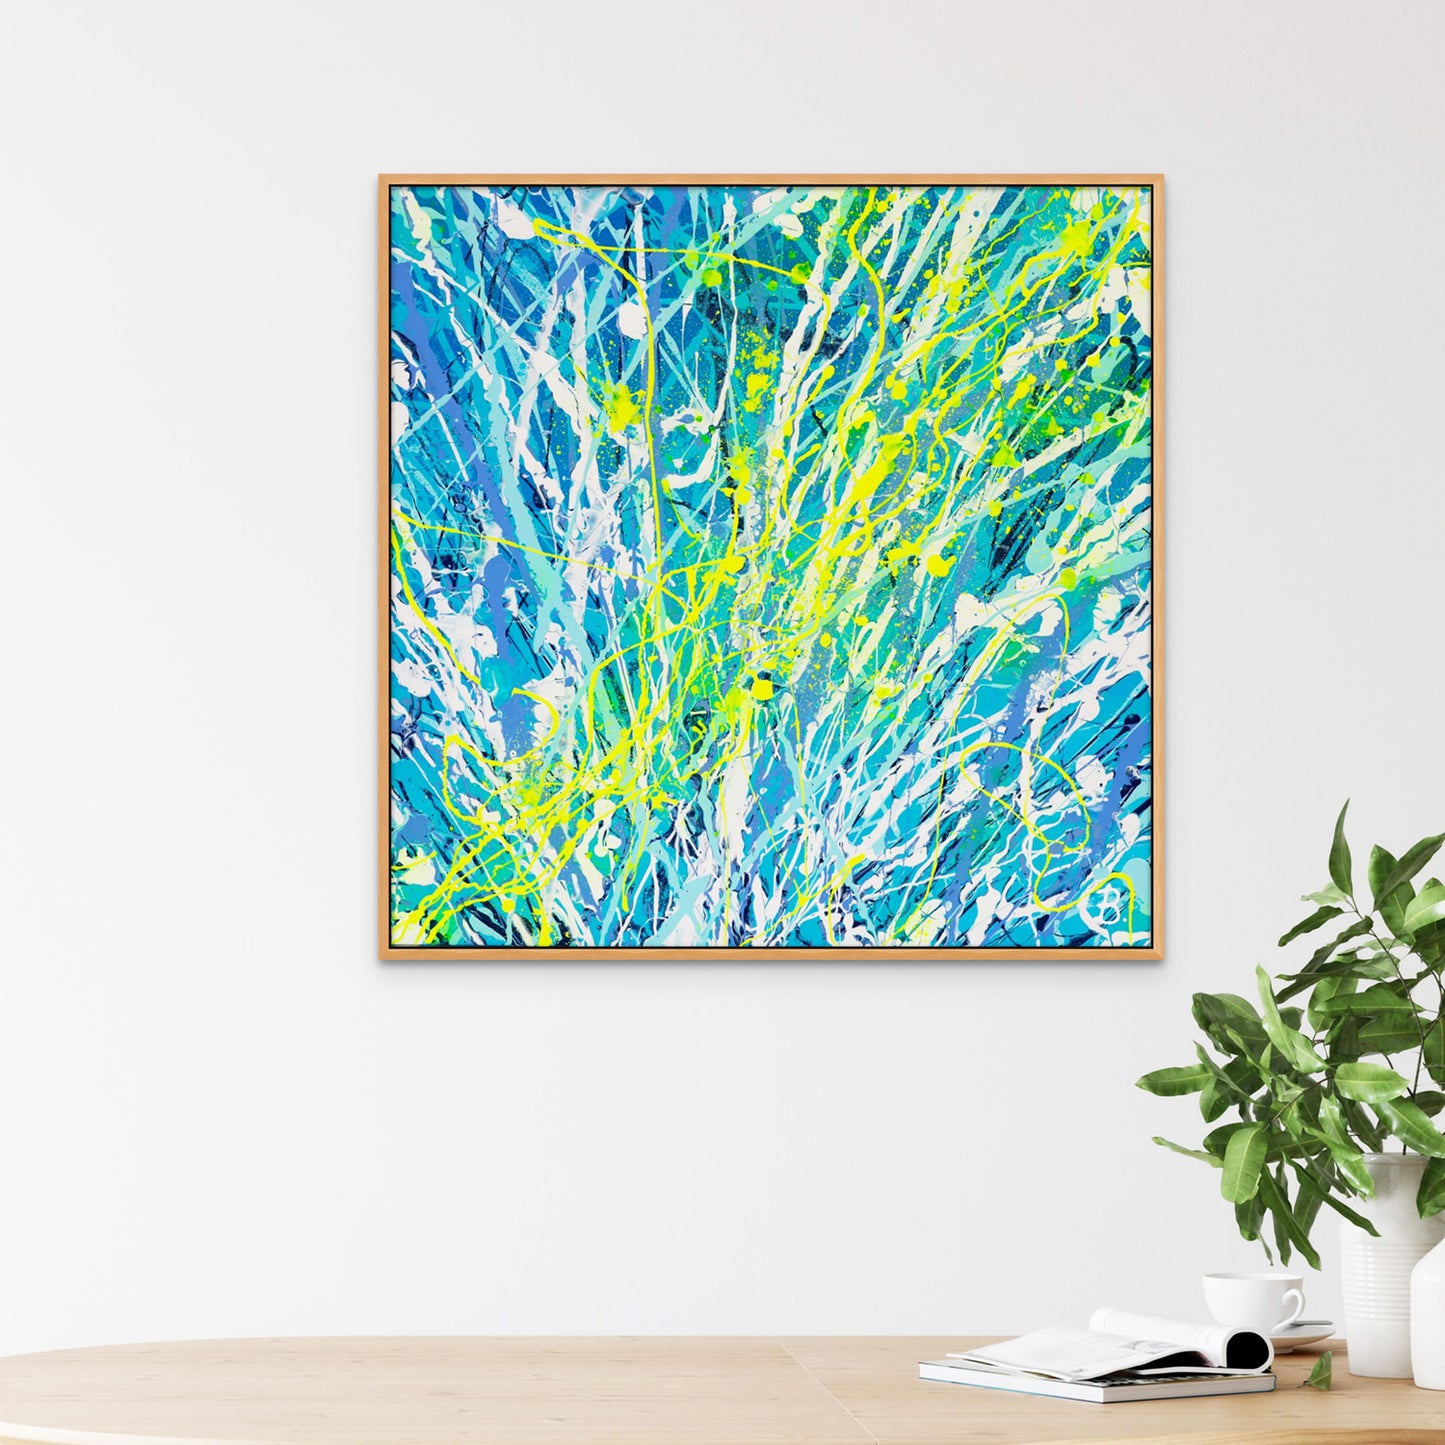 'Luminescence' Original Abstract Textured, Colourful Painting in Situ. Canvas Wall art seen framed in Solid Oak Timber Float Frame. Hand painted original by Bridget Bradley, Abstract Expressionist Artist, Sunshine Coast, Australia